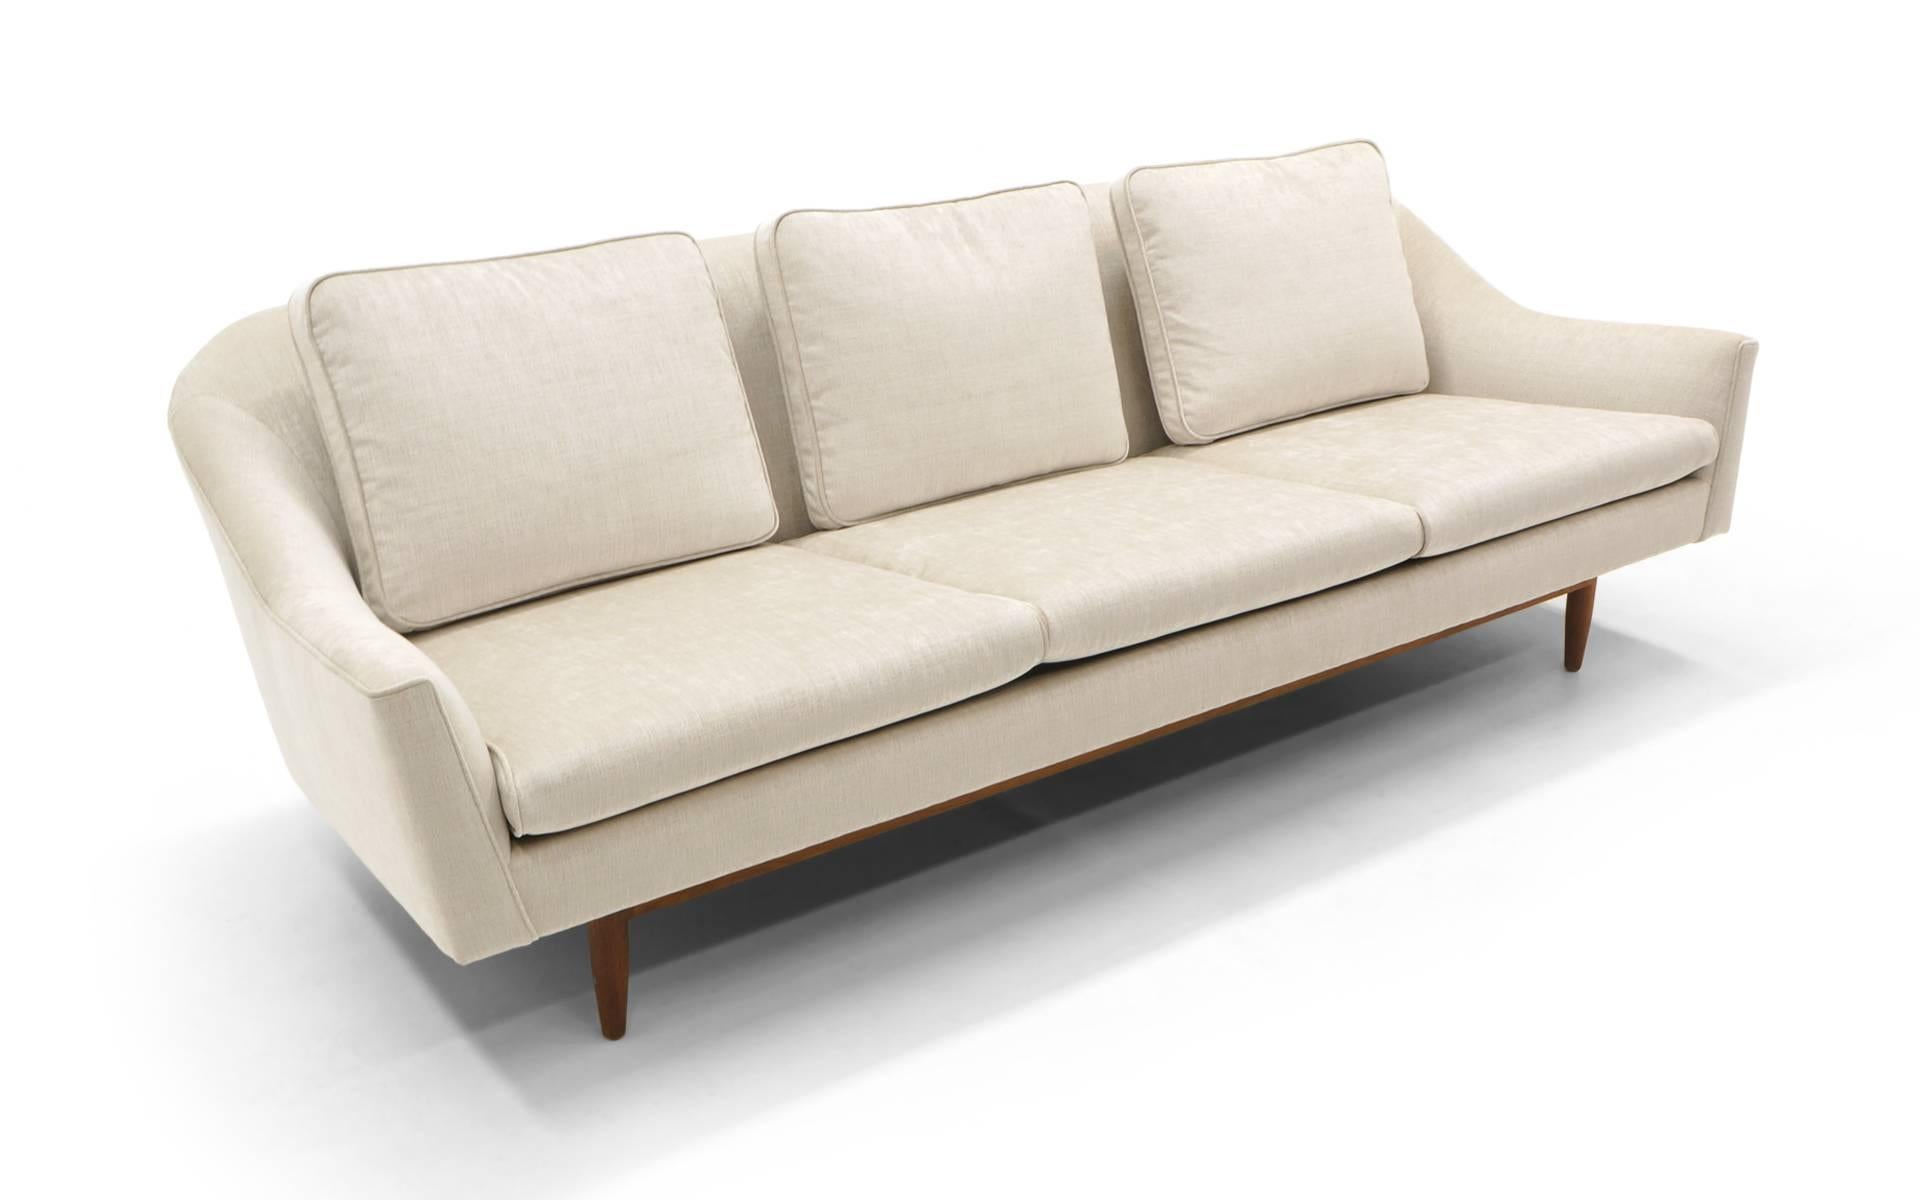 Stunning sofa designed by Jens Risom for Jens Risom Designs. Maybe the most comfortable modern sofa we have ever had. Expertly restored and reupholstered in an creamy / ivory Knoll fabric. Beautiful soft texture. Solid walnut base. Great sofa.